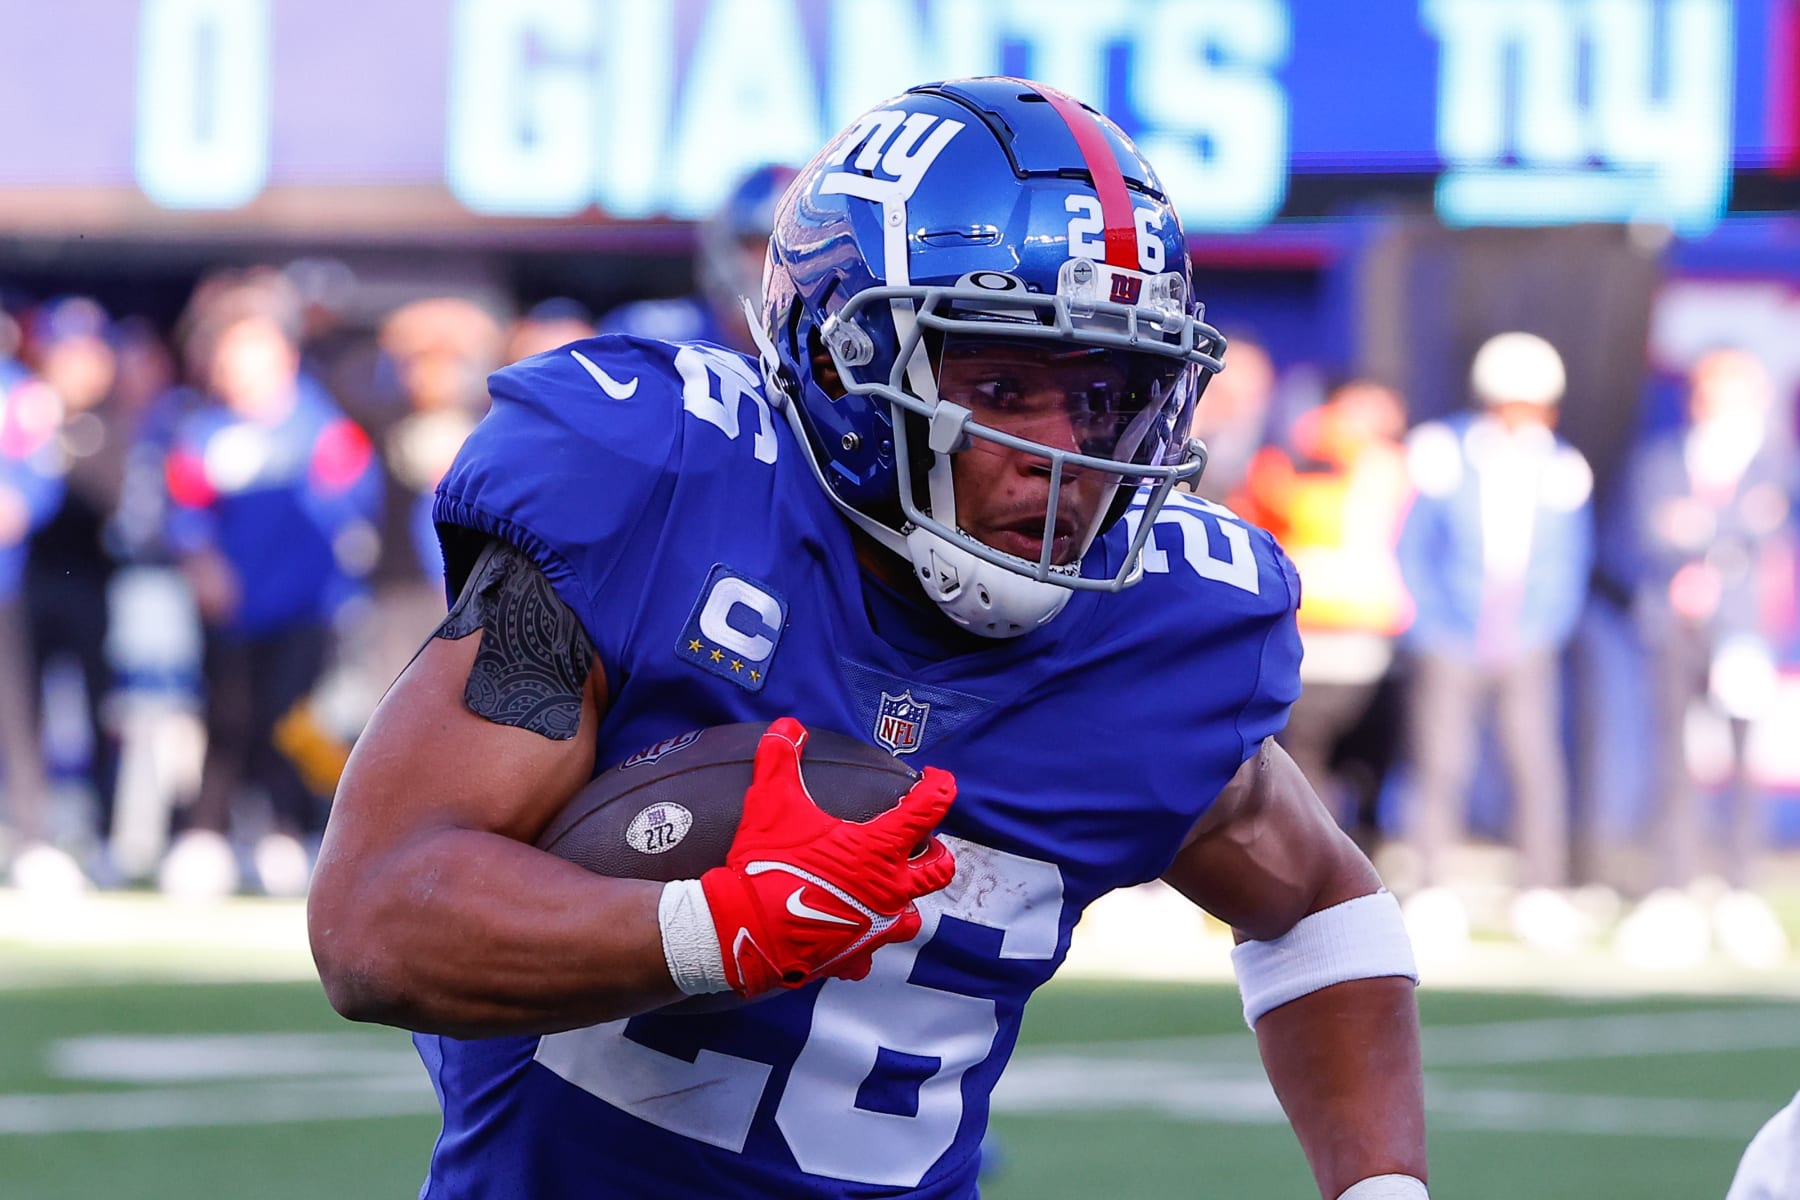 NFL power rankings: Where do the Giants stand post-draft? - Big